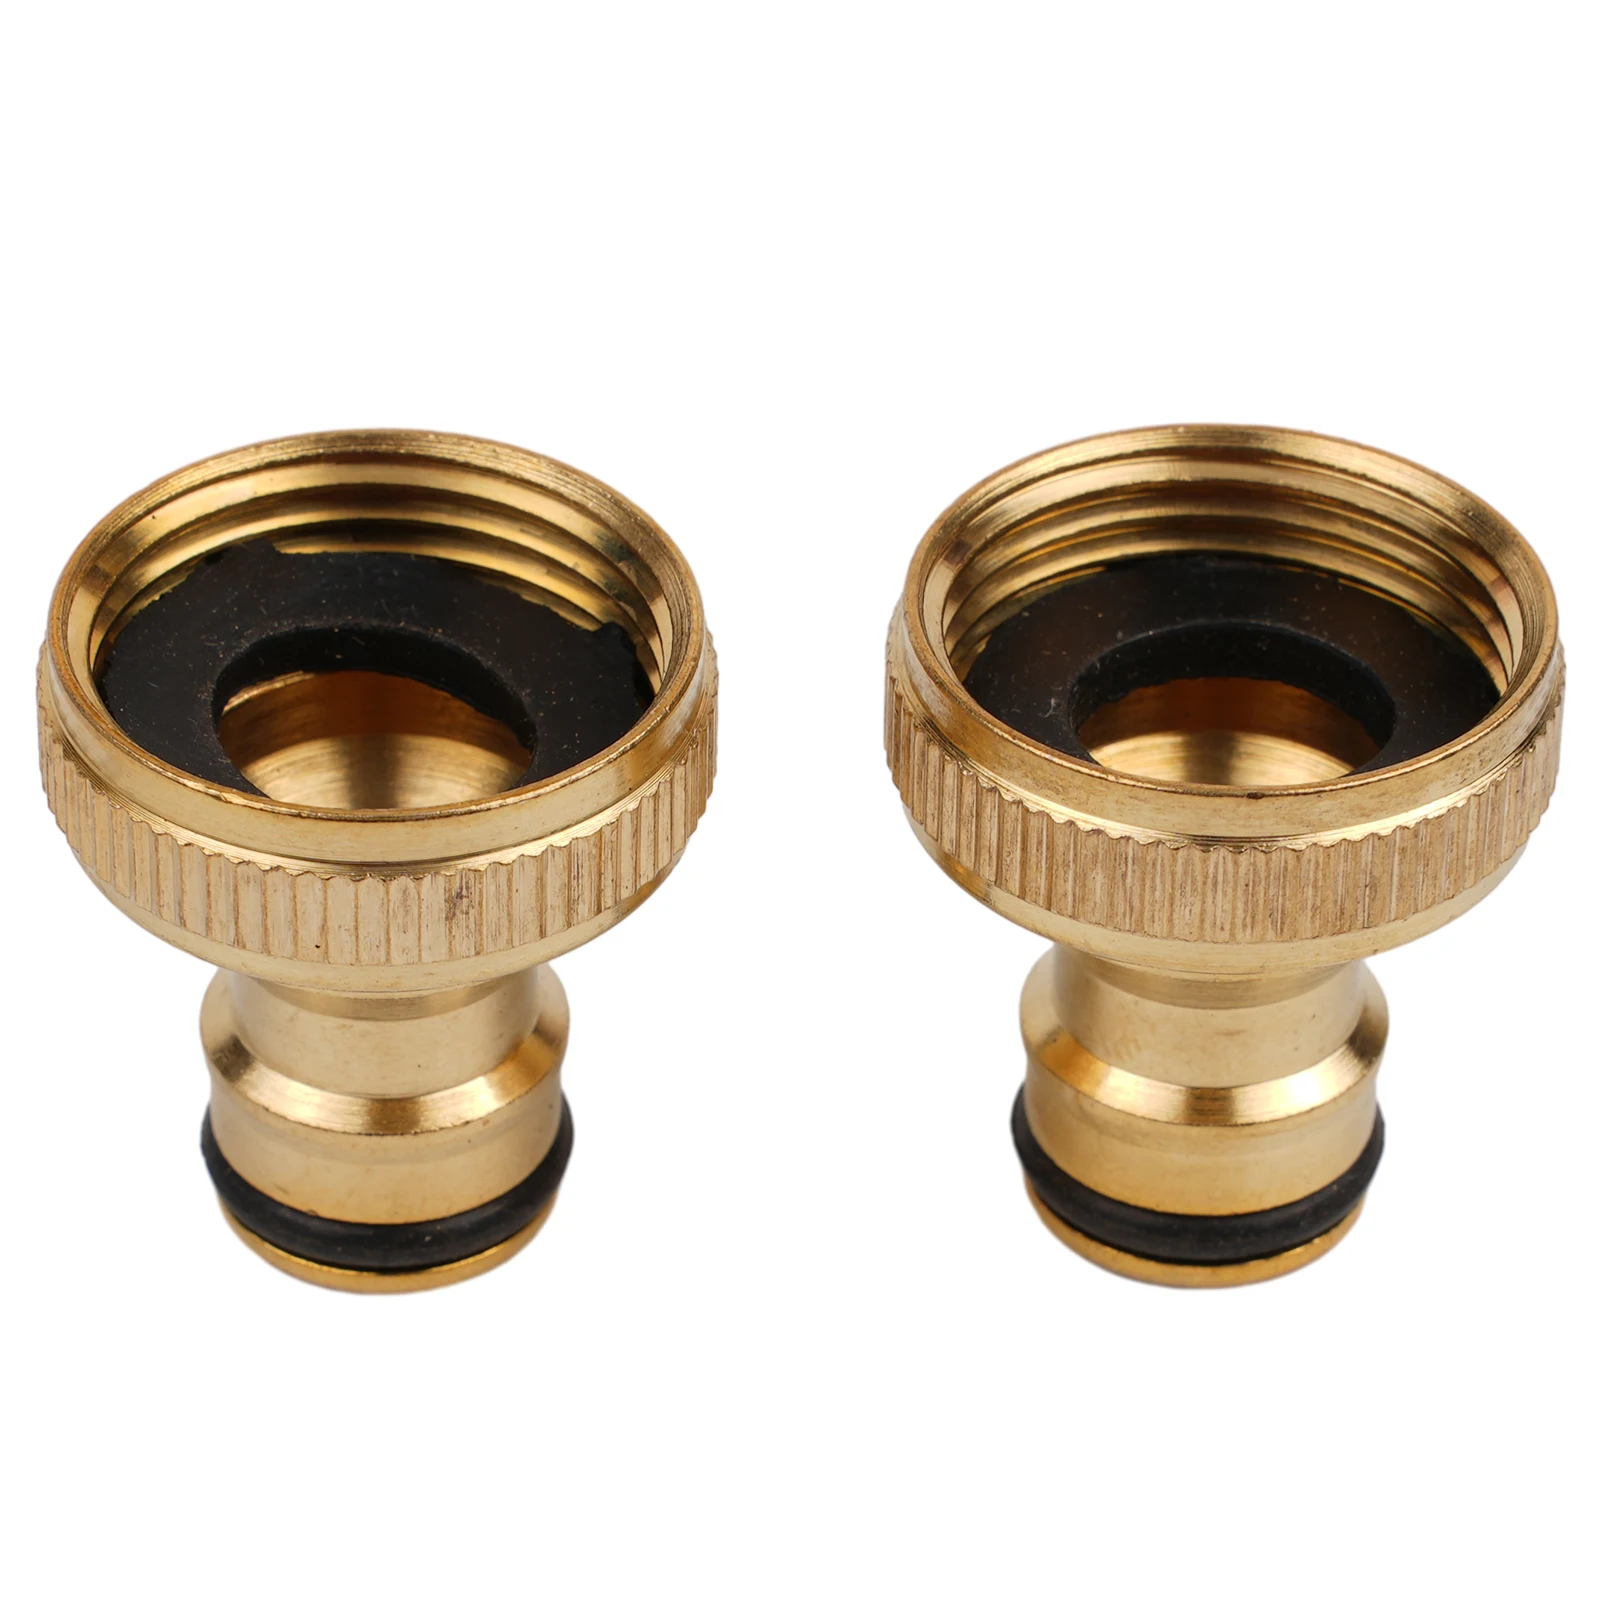 

Tap Thread Connector Quick Adaptor Water Pipe 1.57*1.18in 2PCS 3/4" To 1/2" 4*3cm Faucet Fitting Durable Practical